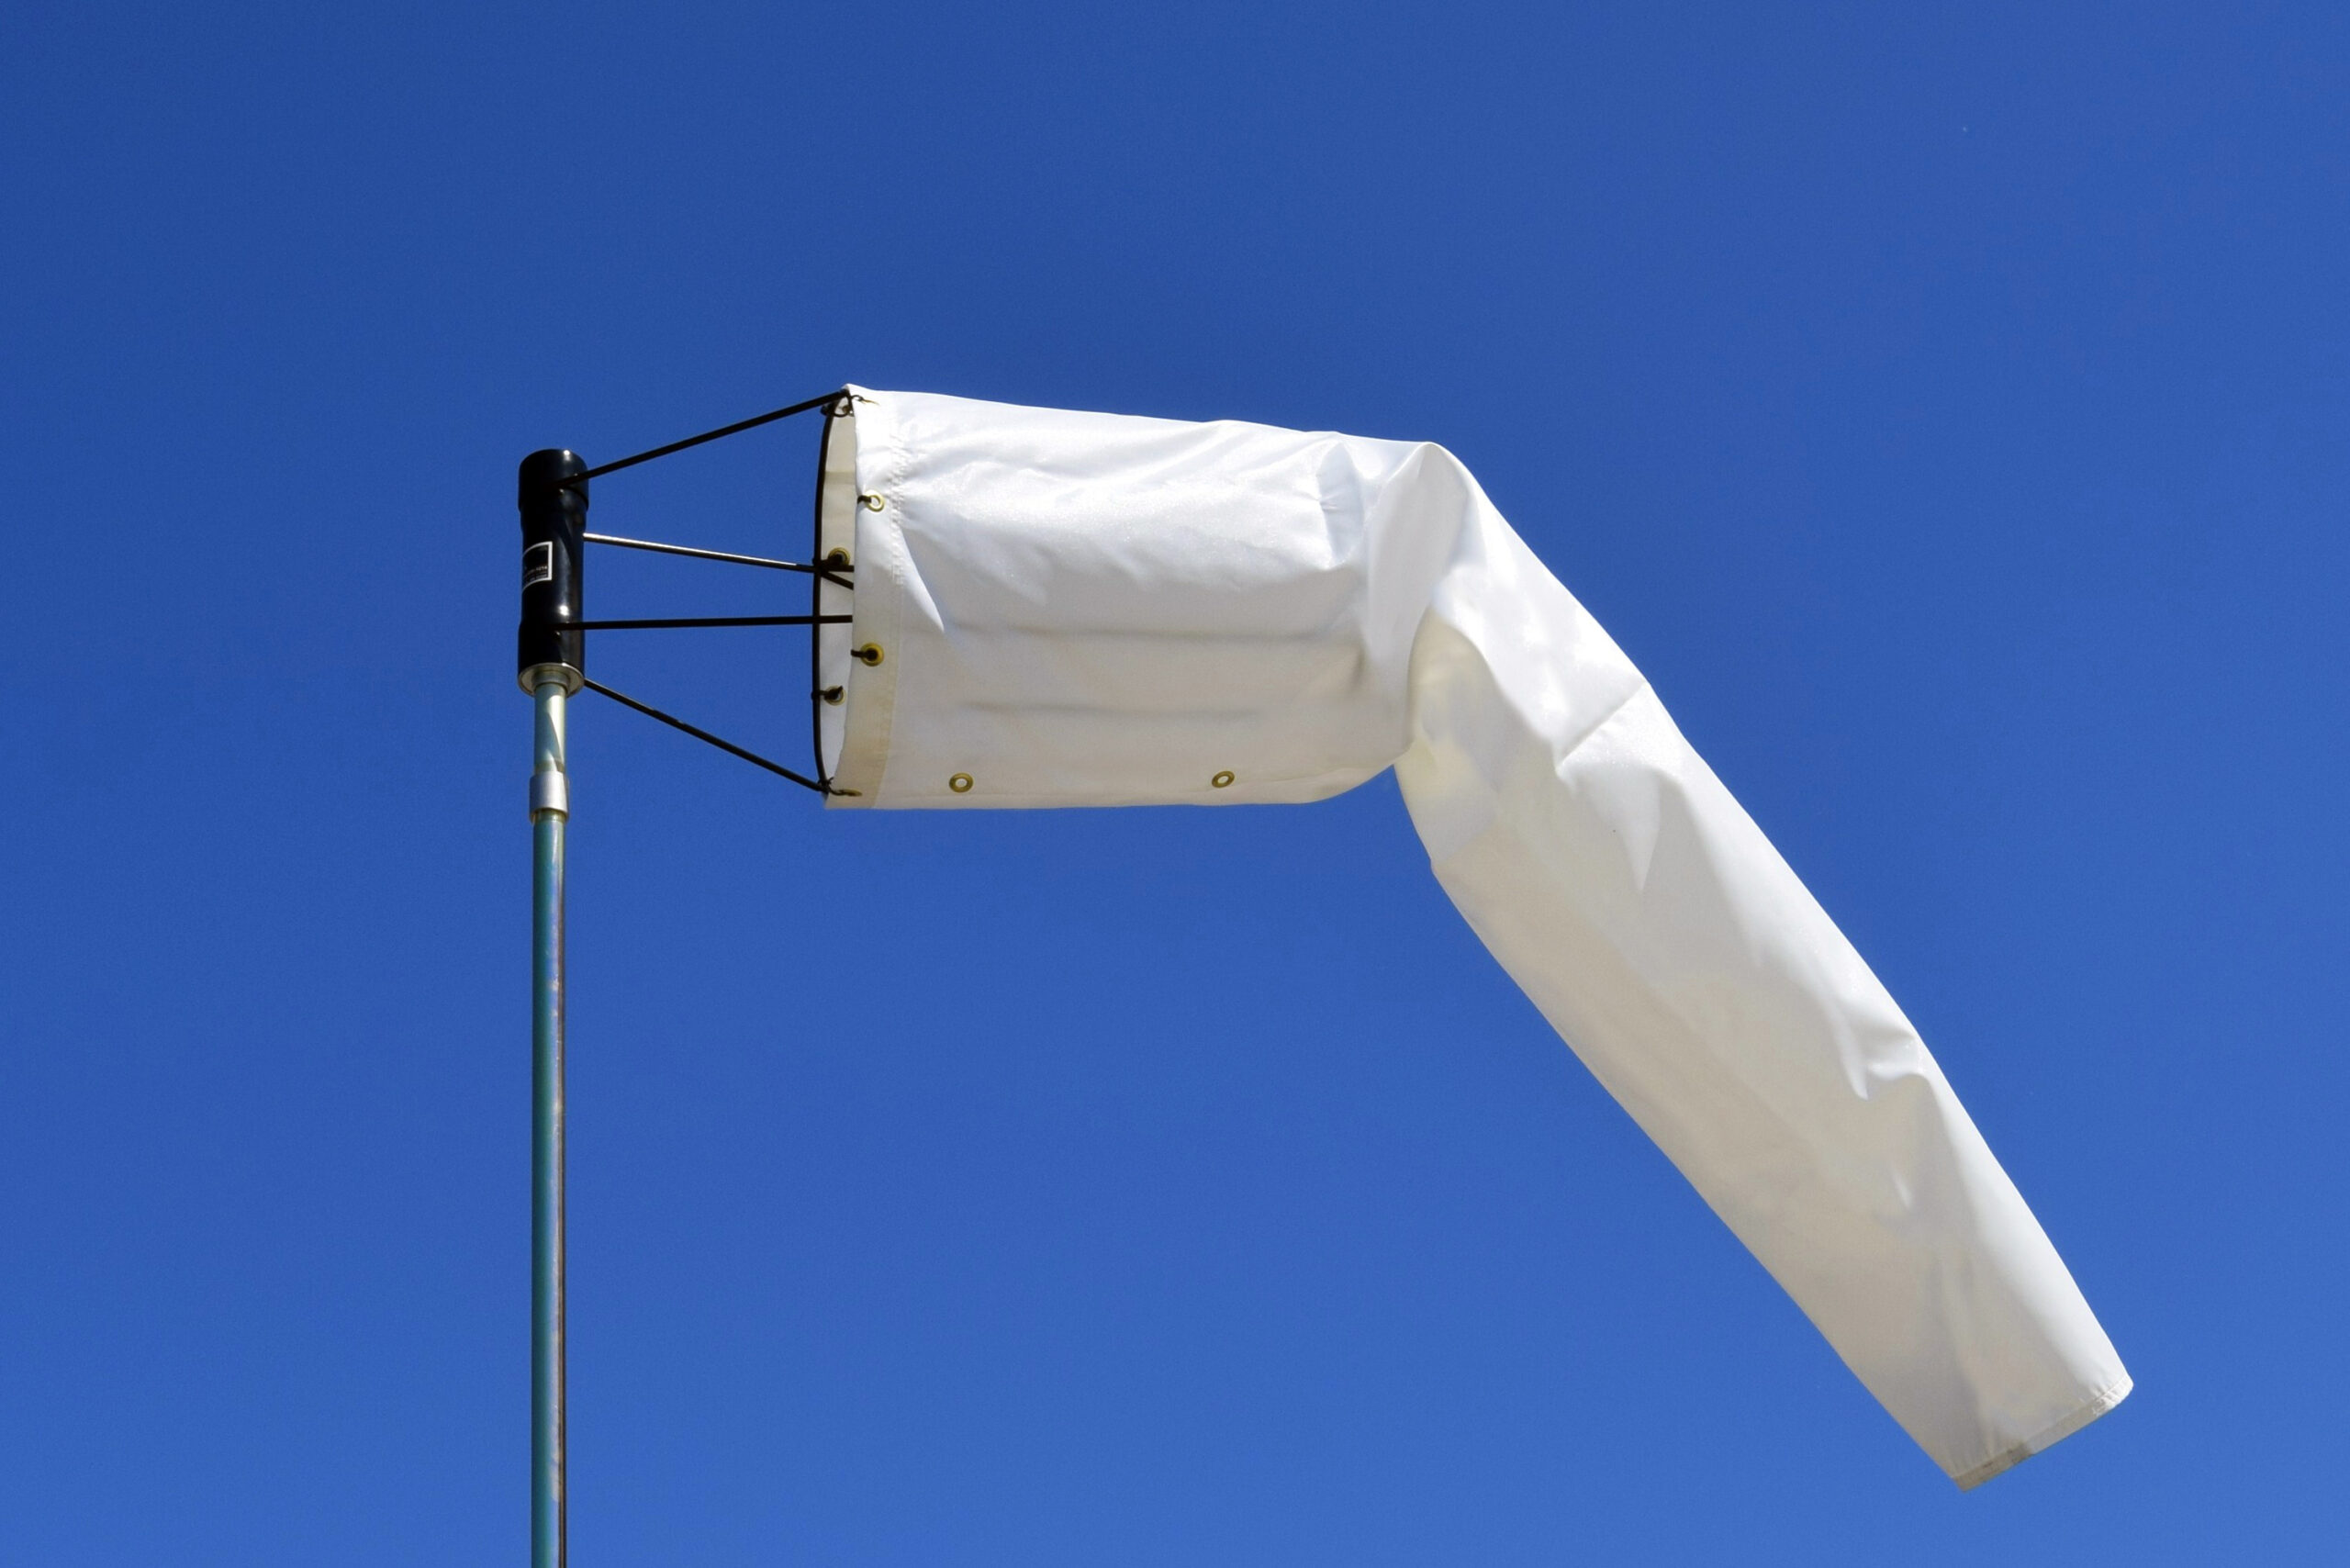 White heavy-duty windsock against a clear blue sky, showing wind direction.